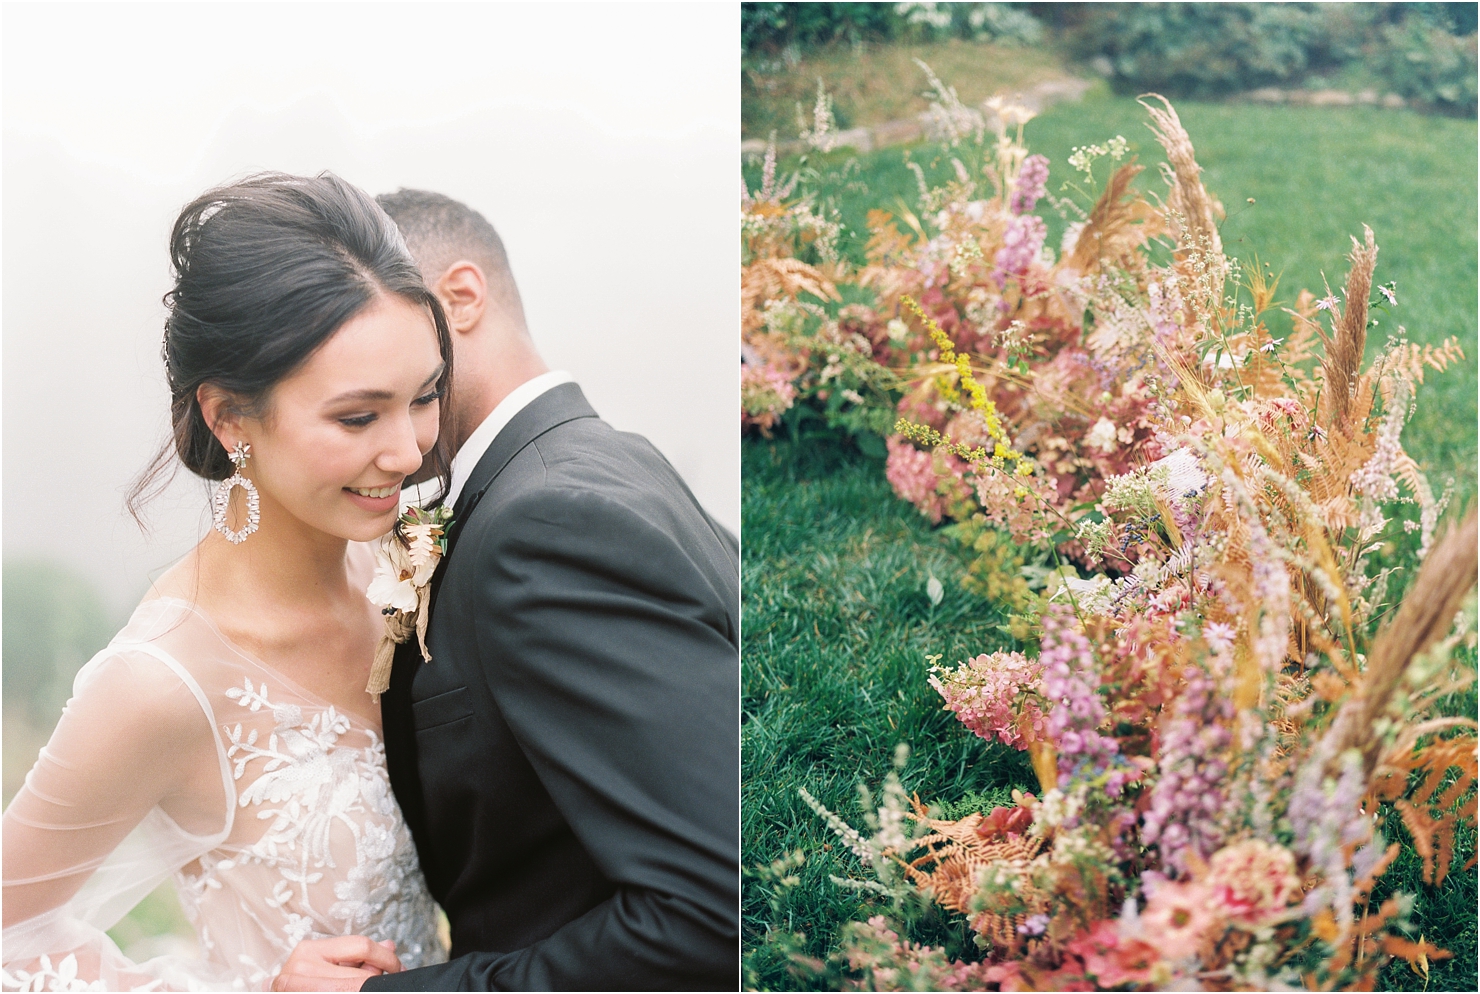 Old Edwards Inn Wedding Photographer Highlands, NC Madeline Trent Romantic Film Fine Art Luxury Photographer Half-Mile Farm Rockwood Lodge Editorial Wedding Sparrow Tablescape Chandelier Ginny Early Enemies of the Average Rose Story Farm Willow by Watters 